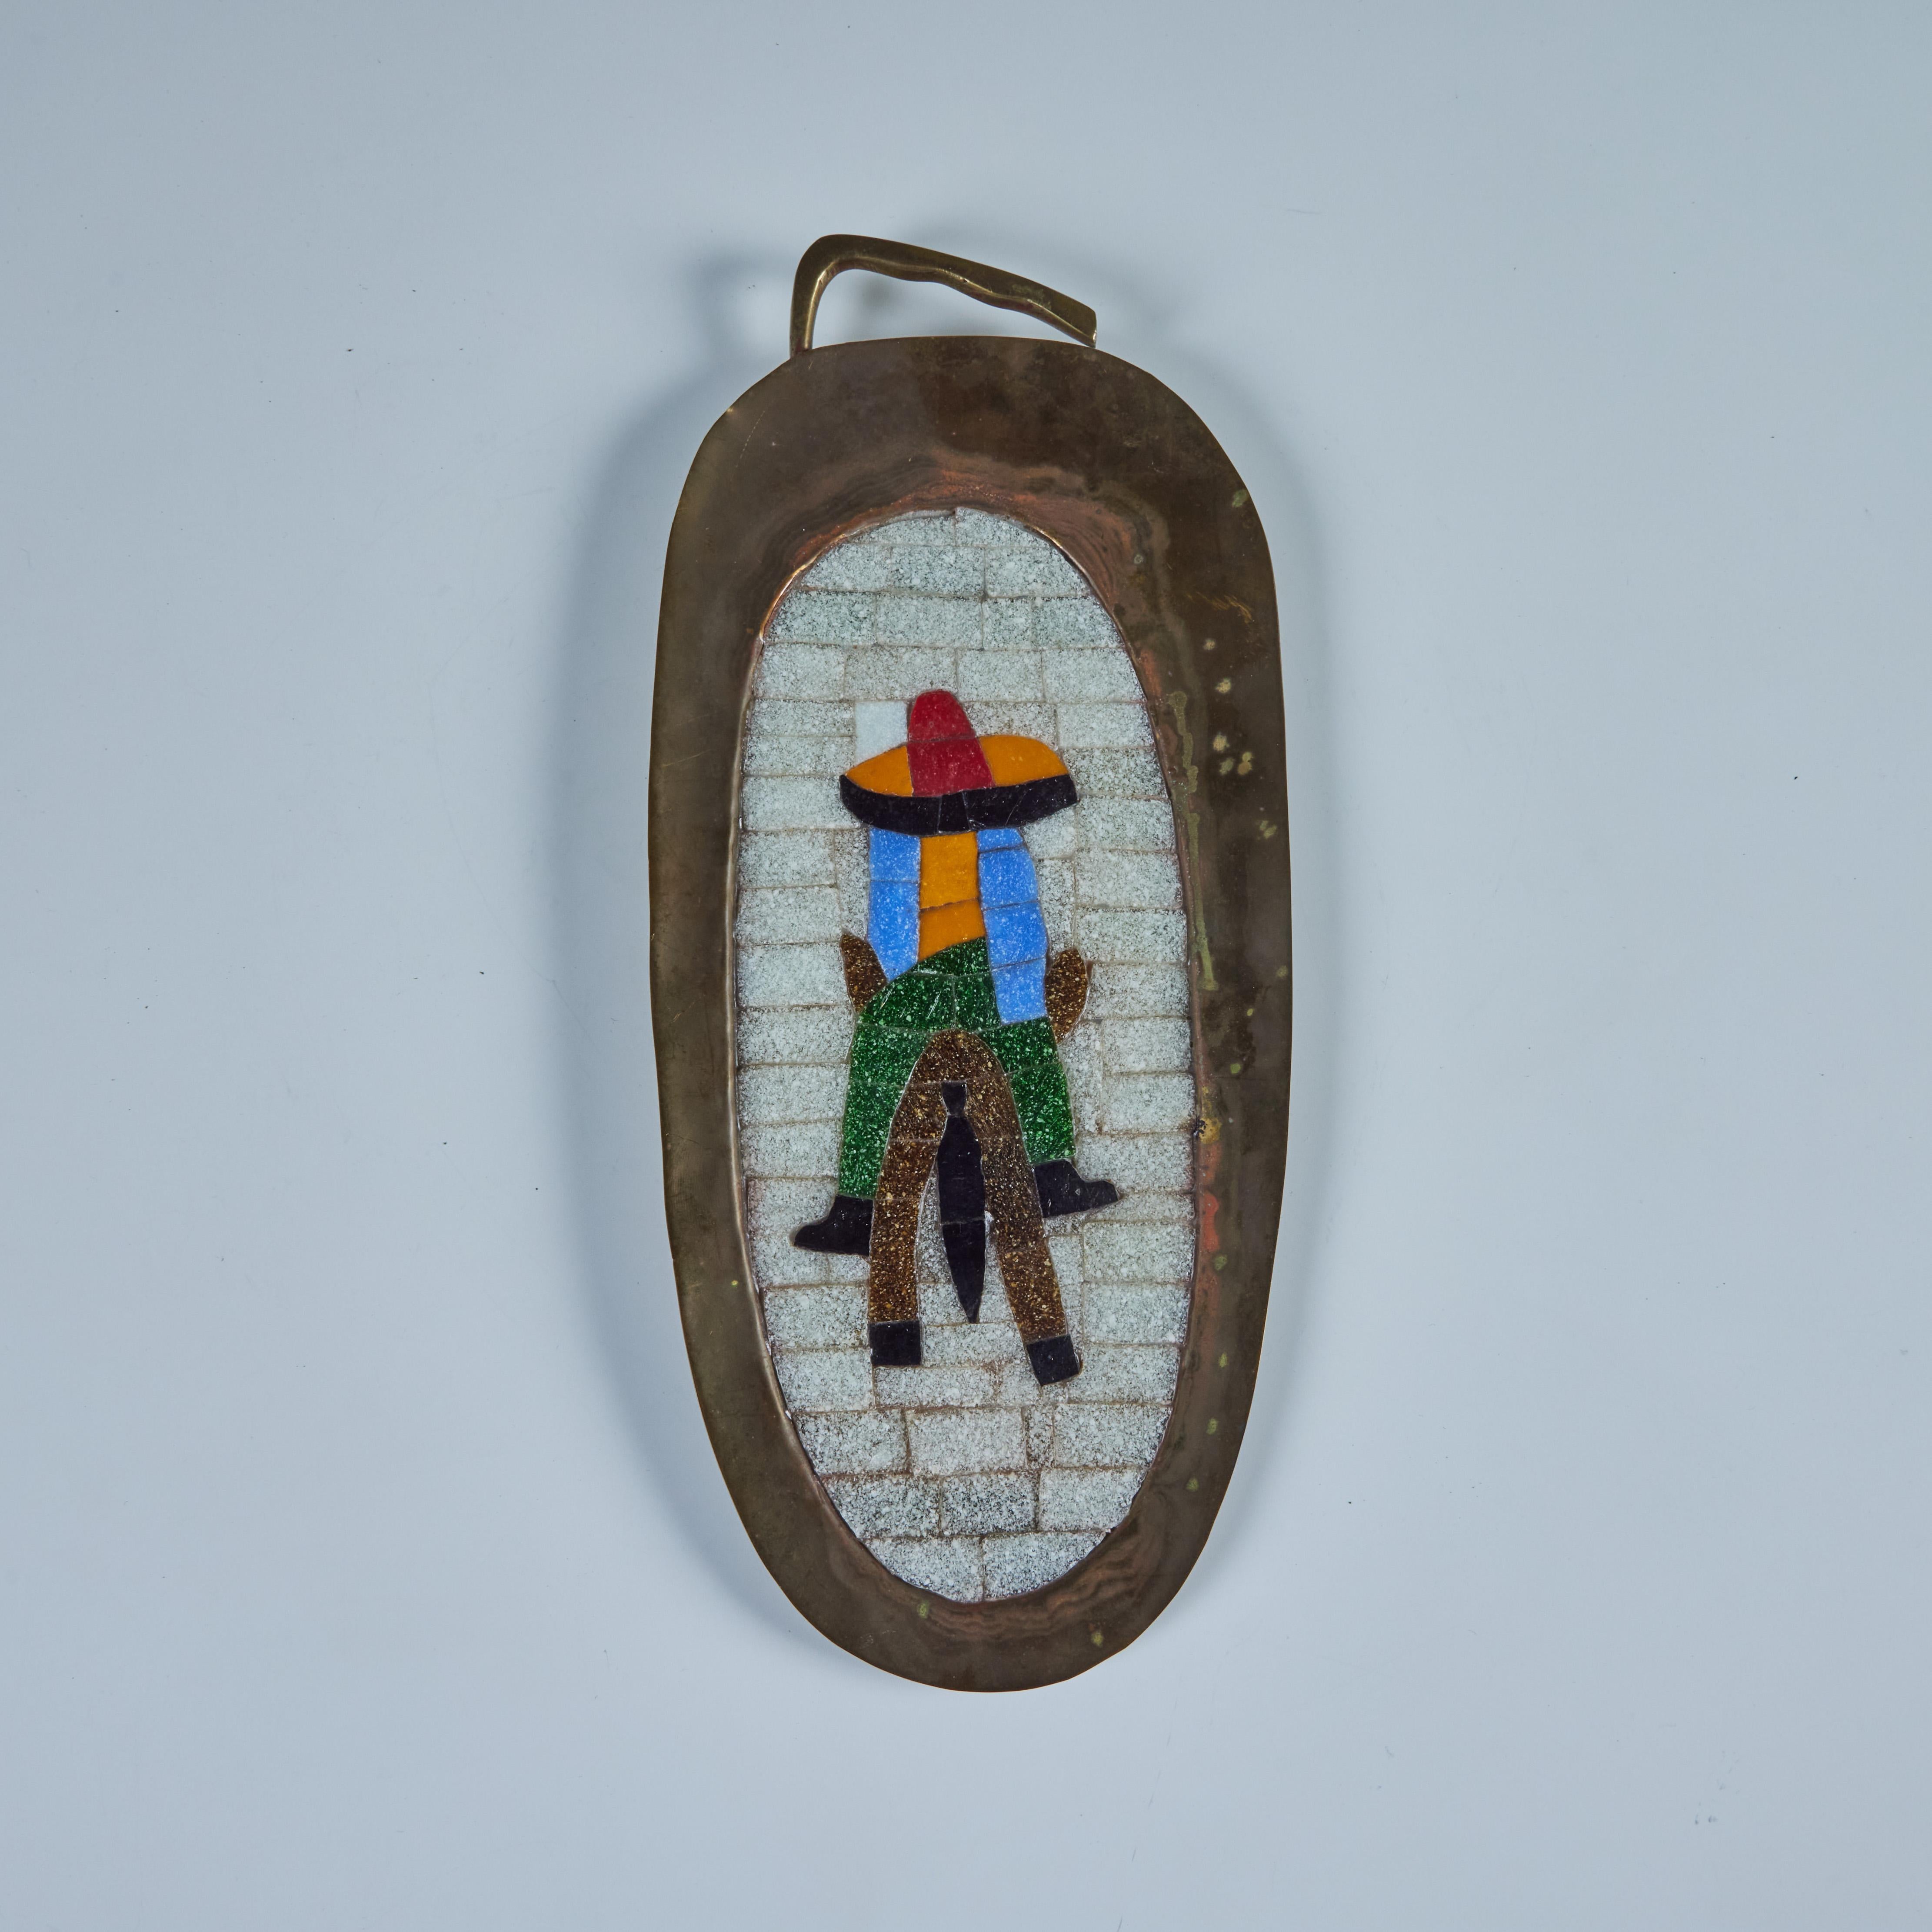 Oval hand wrought brass wall hanging in the style of Salvador Teran, c.1950s Mexico. The tray features tile mosaic inlay of a man riding a donkey in a sombrero.

Dimensions
15